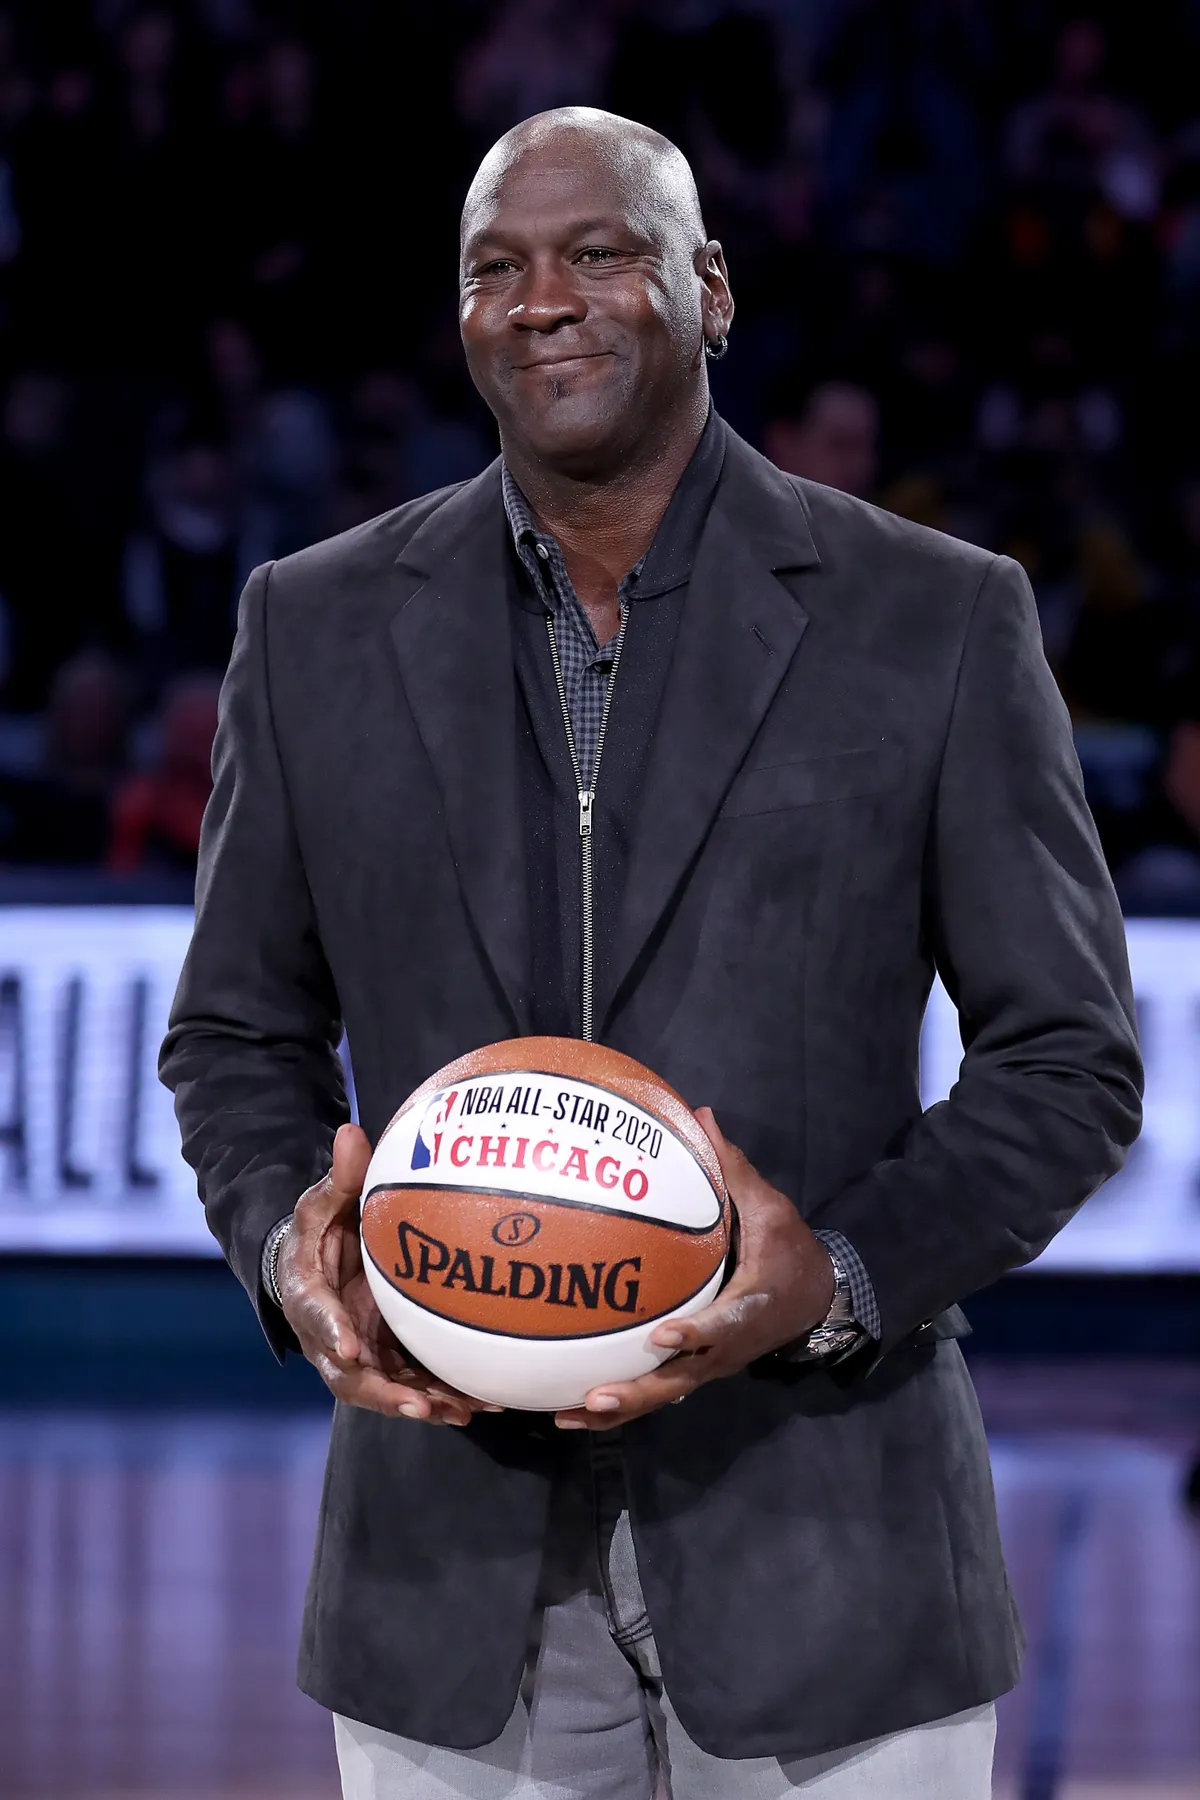 Michael Jordan takes part in a ceremony honoring the 2020 NBA All-Star game on Feb. 17, 2019 | Photo: Getty Images